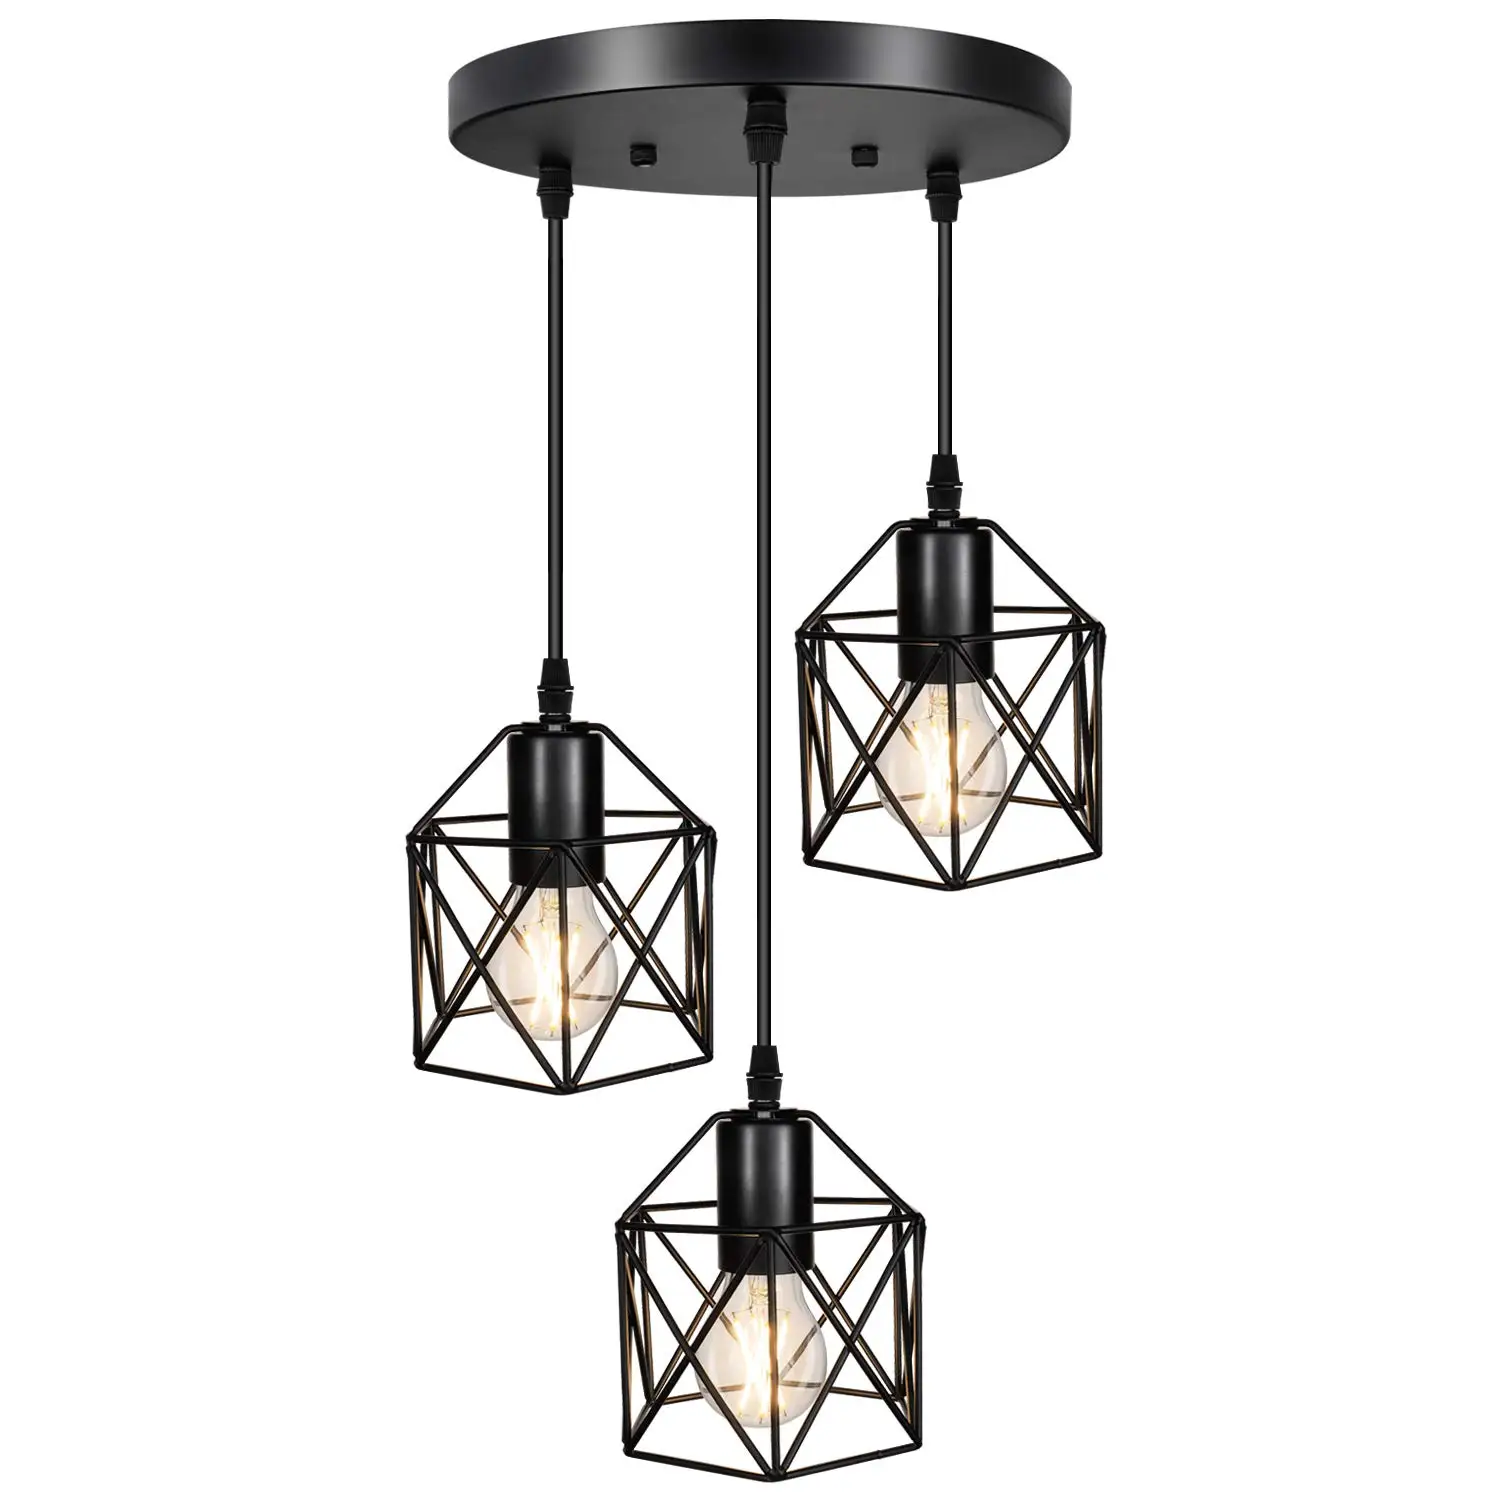 ceiling lamp dining roomceiling lamp home depotce household pendant ligh... - $53.09